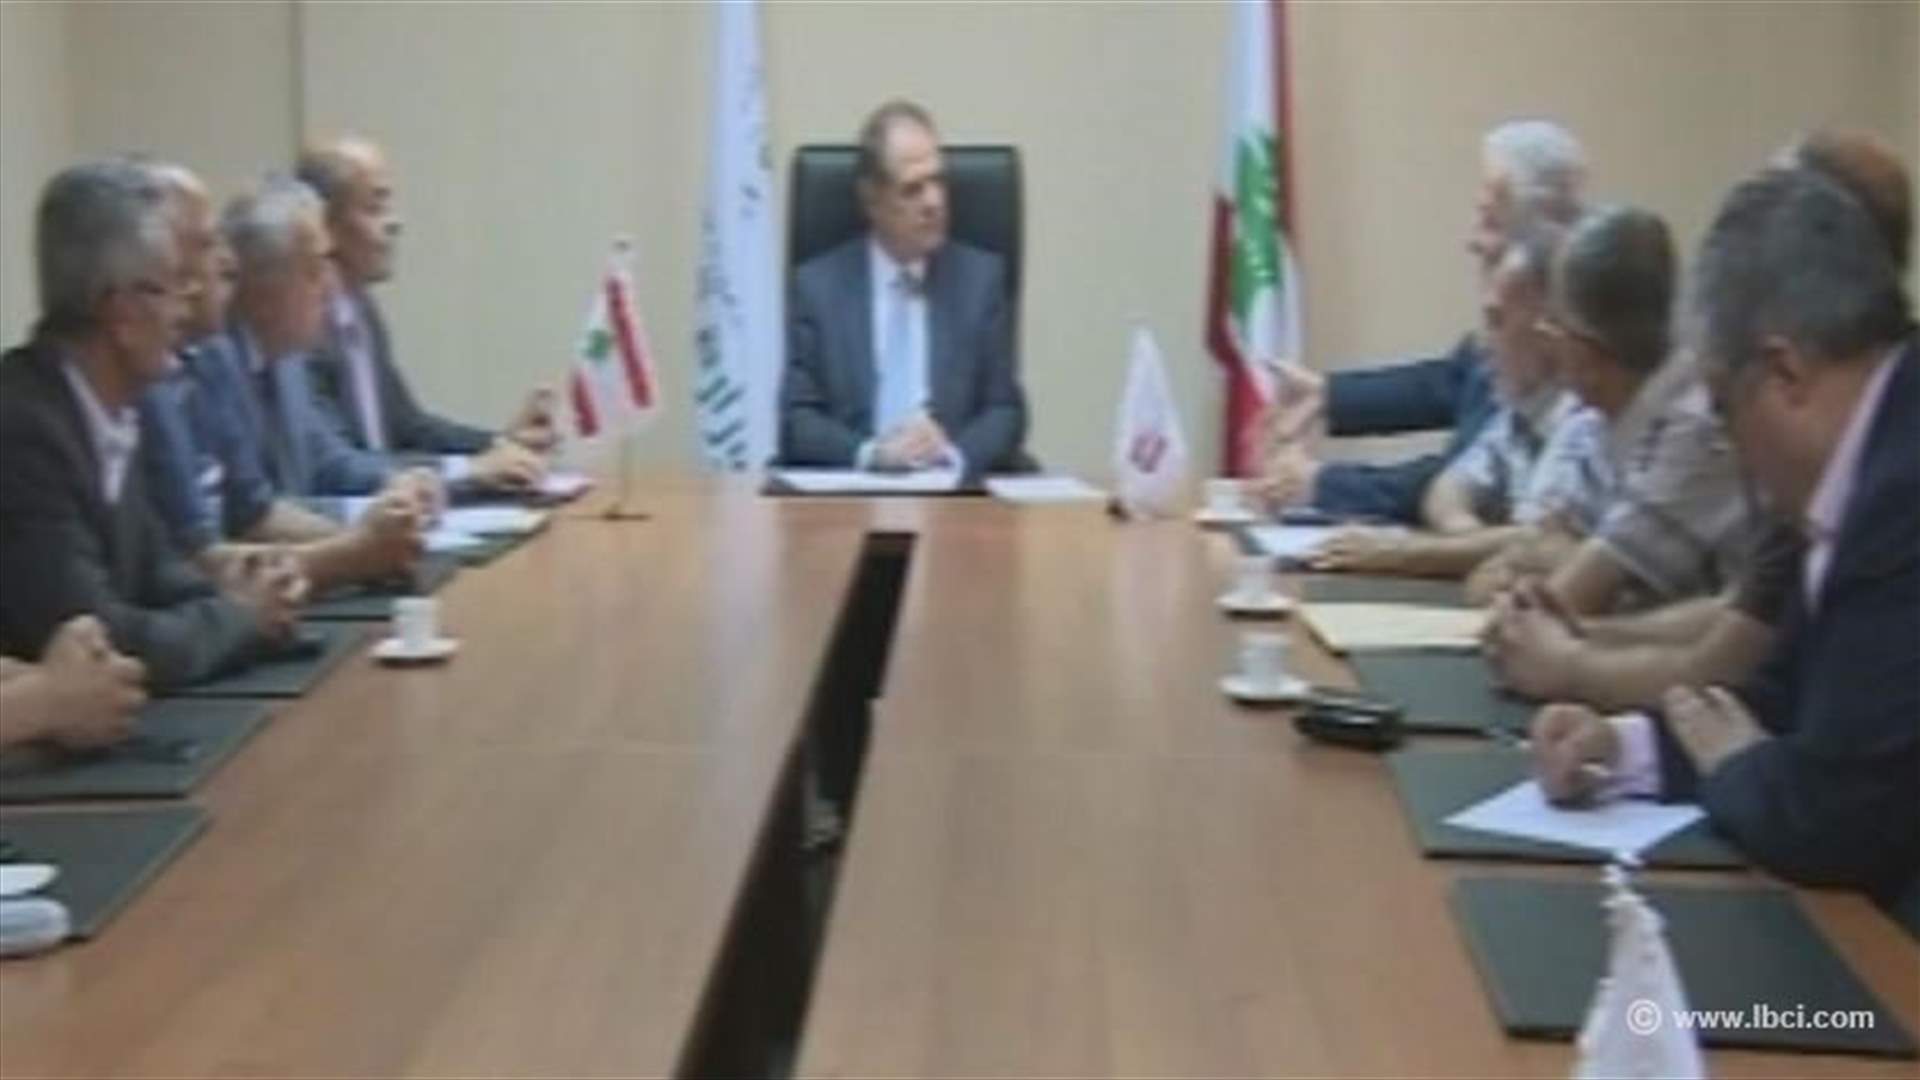 Minister Azzi meets with MP Pakradounian, discusses Bourj Hammoud landfill